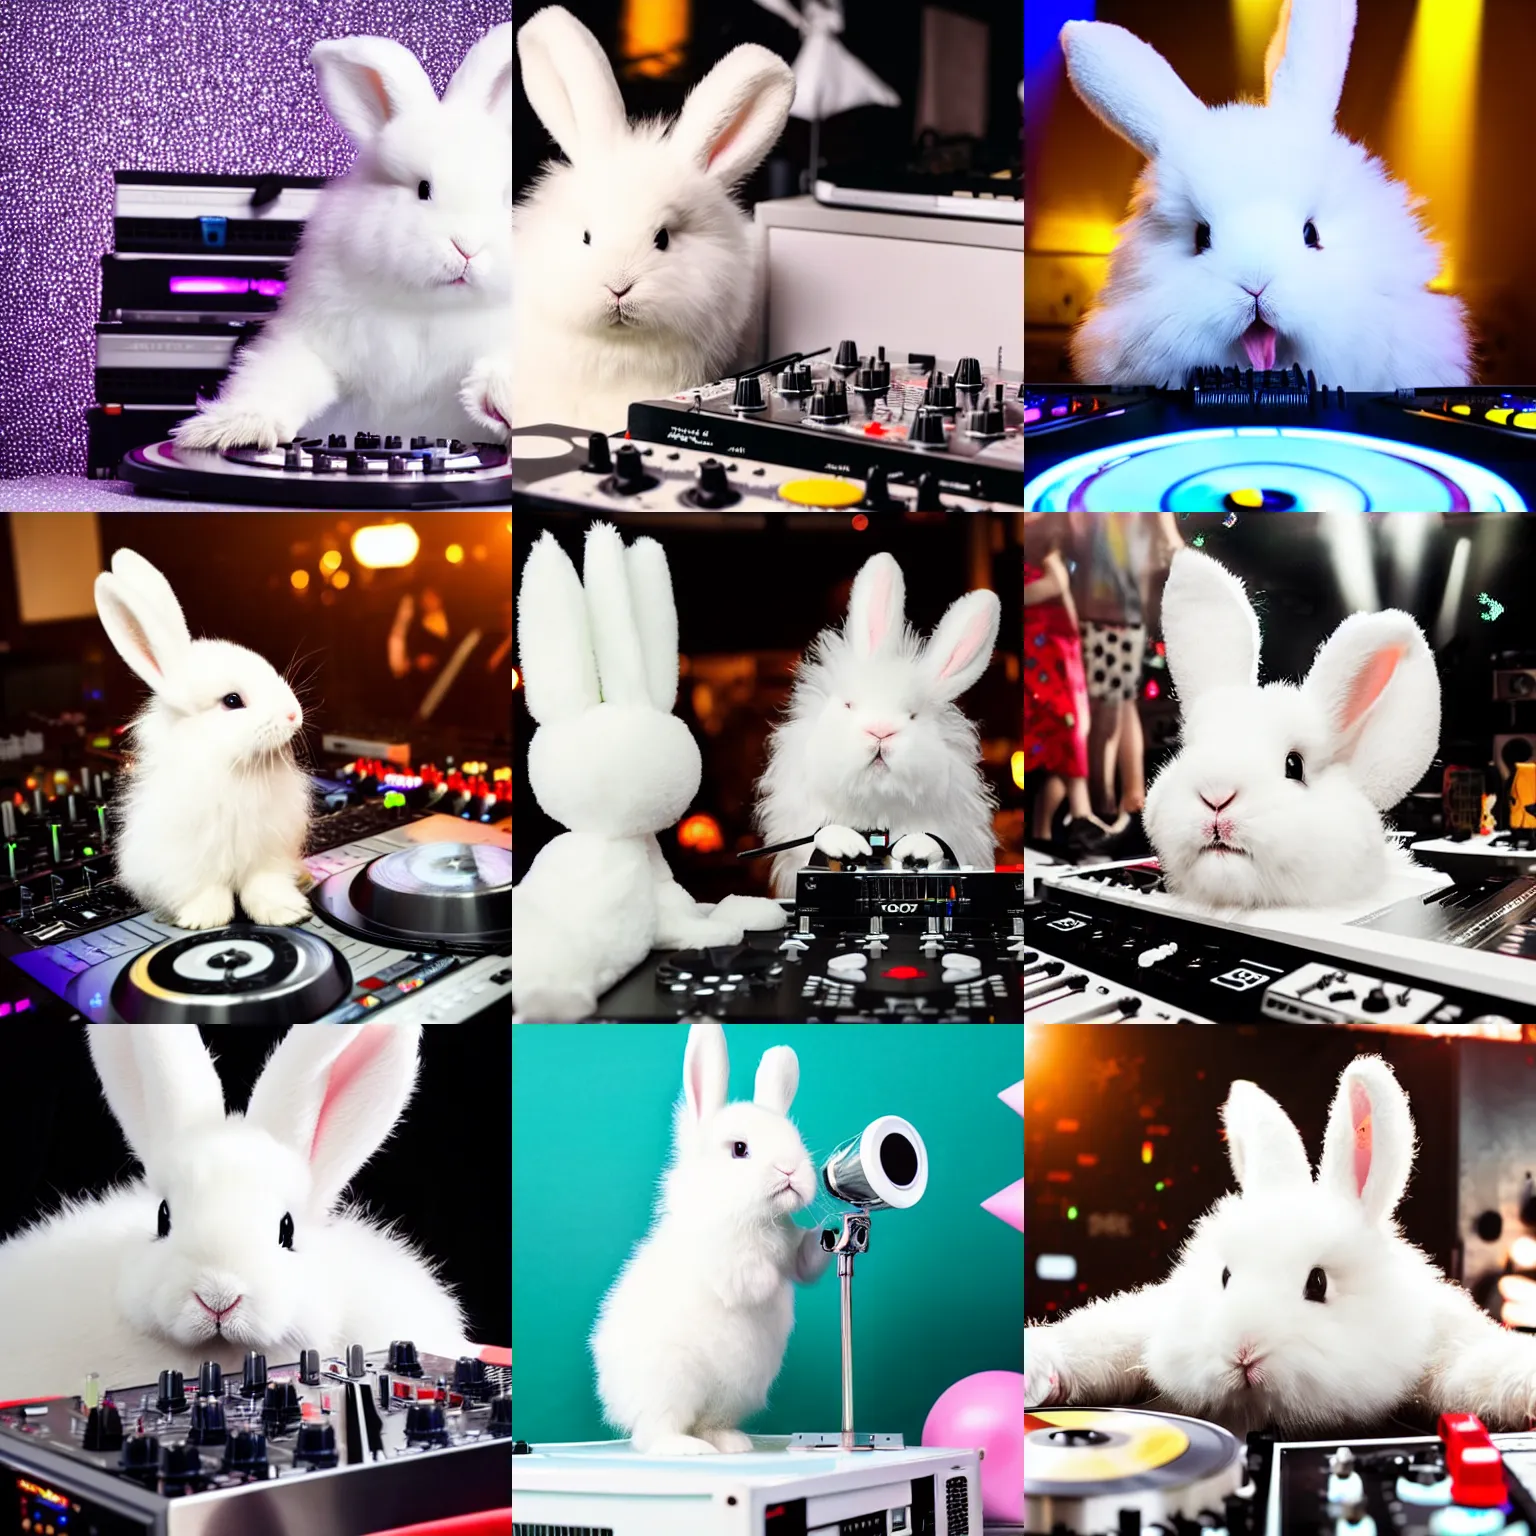 Prompt: super cute fluffy white bunny rabbit drinking and partying while DJing with DJ turntables, photoreal